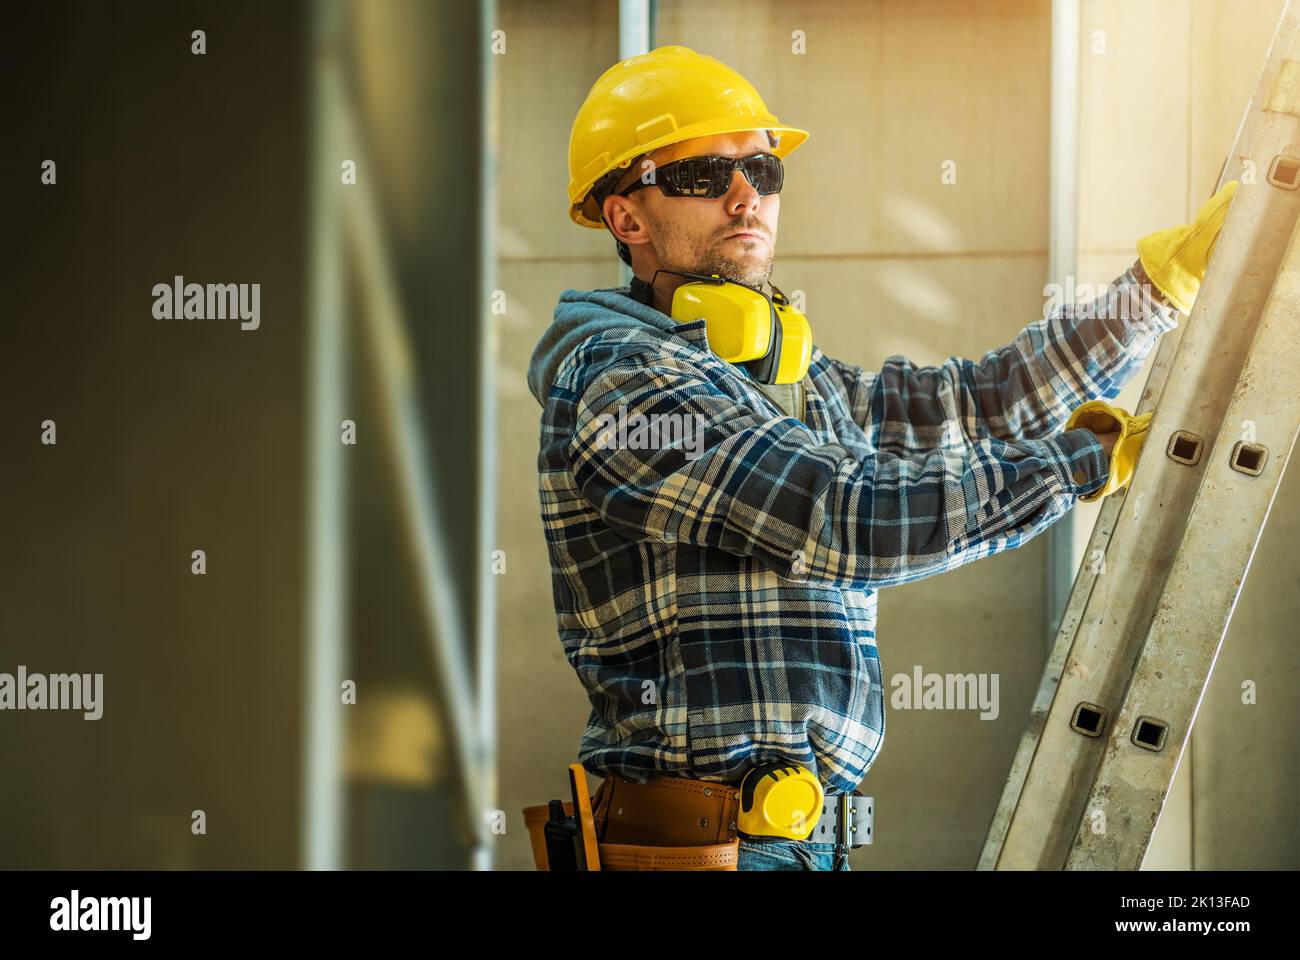 Closeup of Caucasian Middle Aged Contractor Unfolding His Extension Ladder at a Construction Site of New Commercial Building. Industrial Theme. Stock Photo